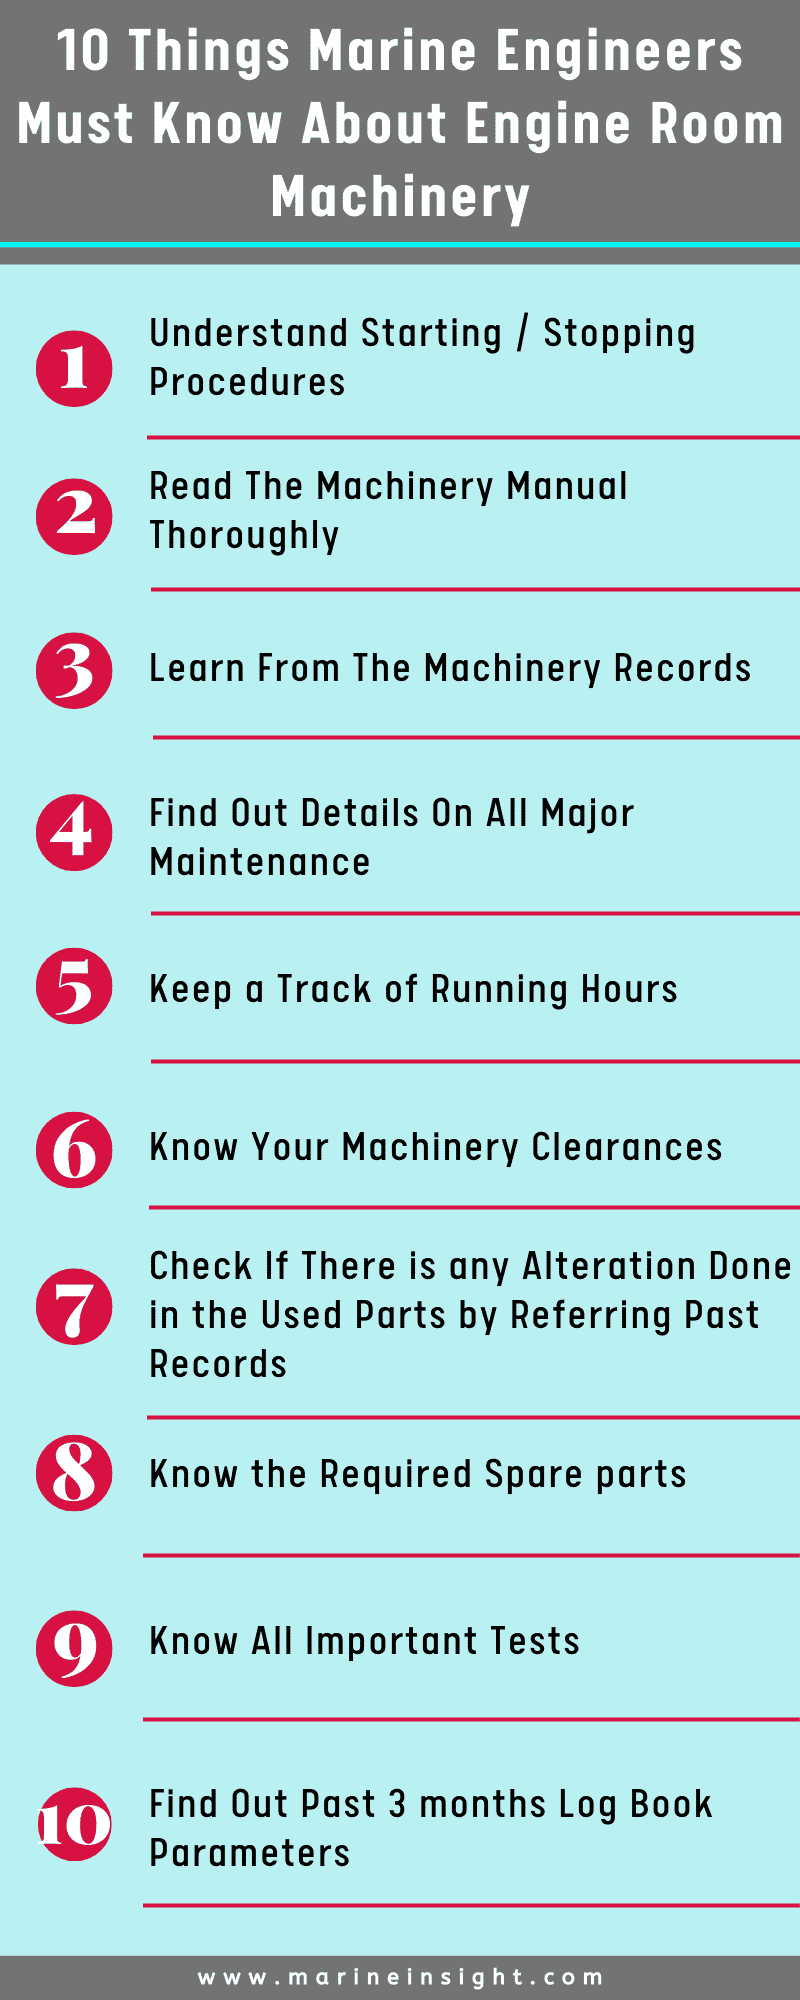 10 Things Marine Engineers Must Know About Engine Room Machinery